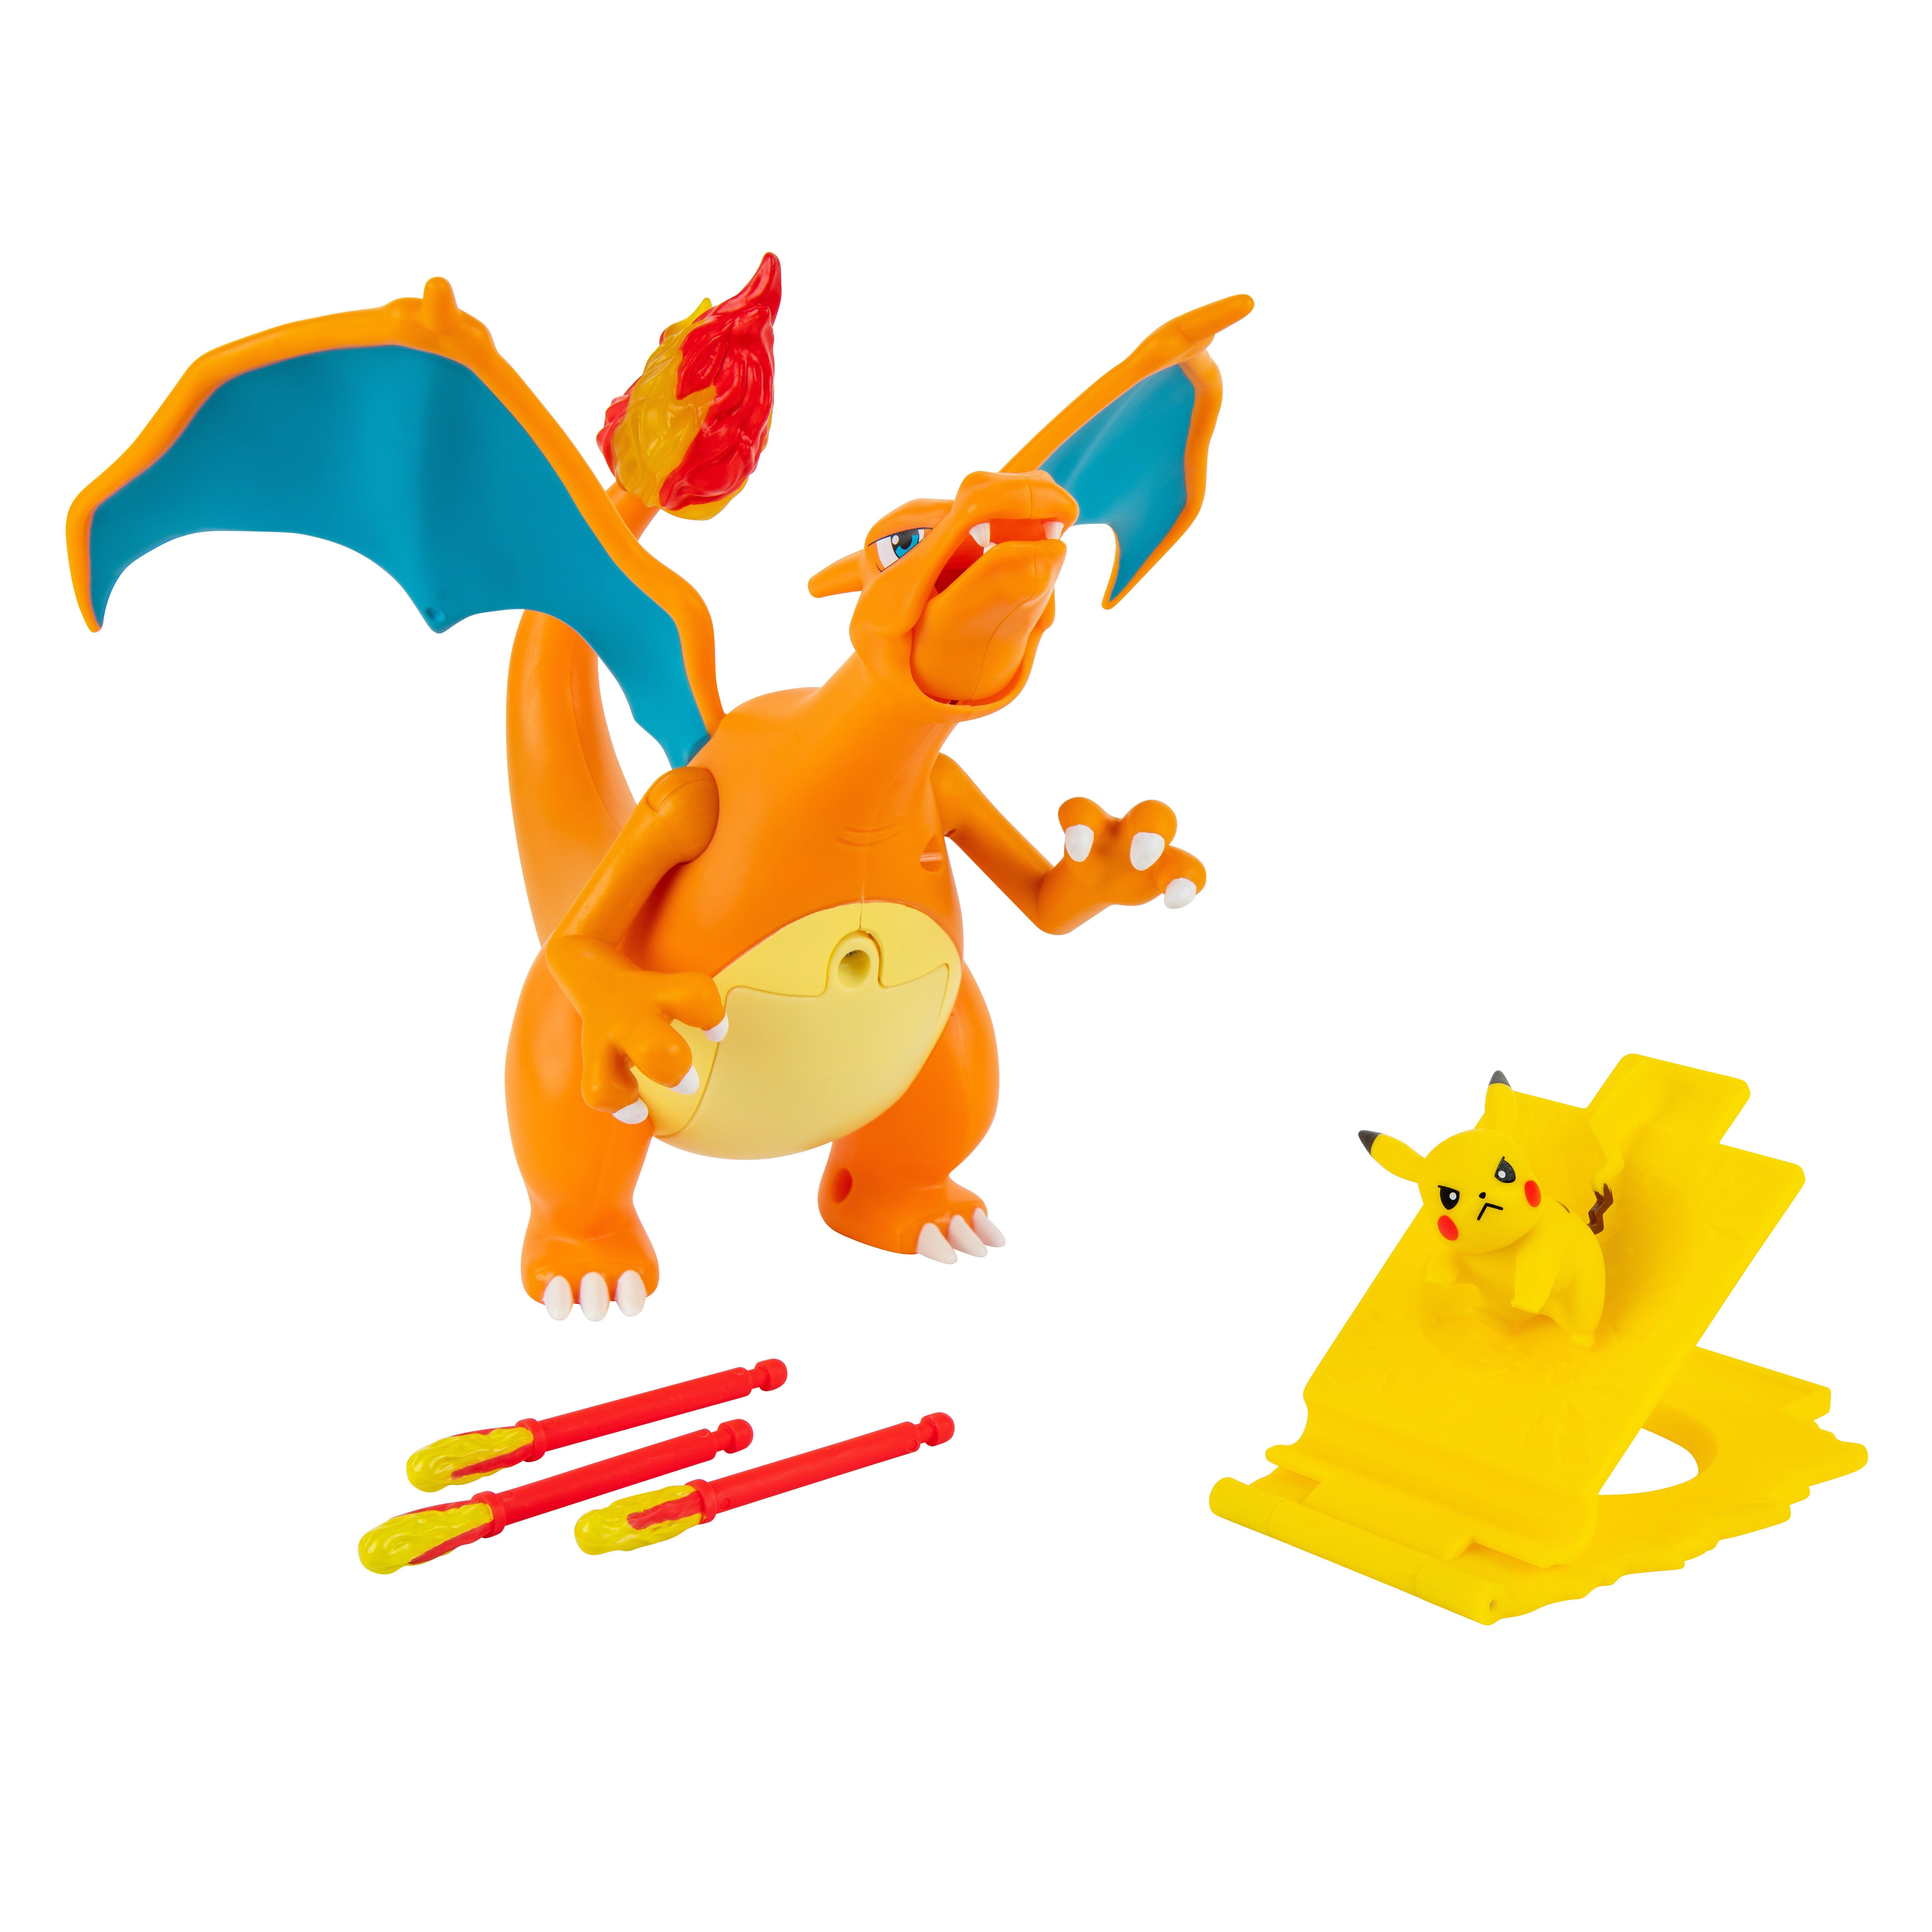 Pokémon Pokemon Charizard, Super-Articulated 6-Inch Figure - Collect Your  Favorite Figures - Toys for Kids and Fans